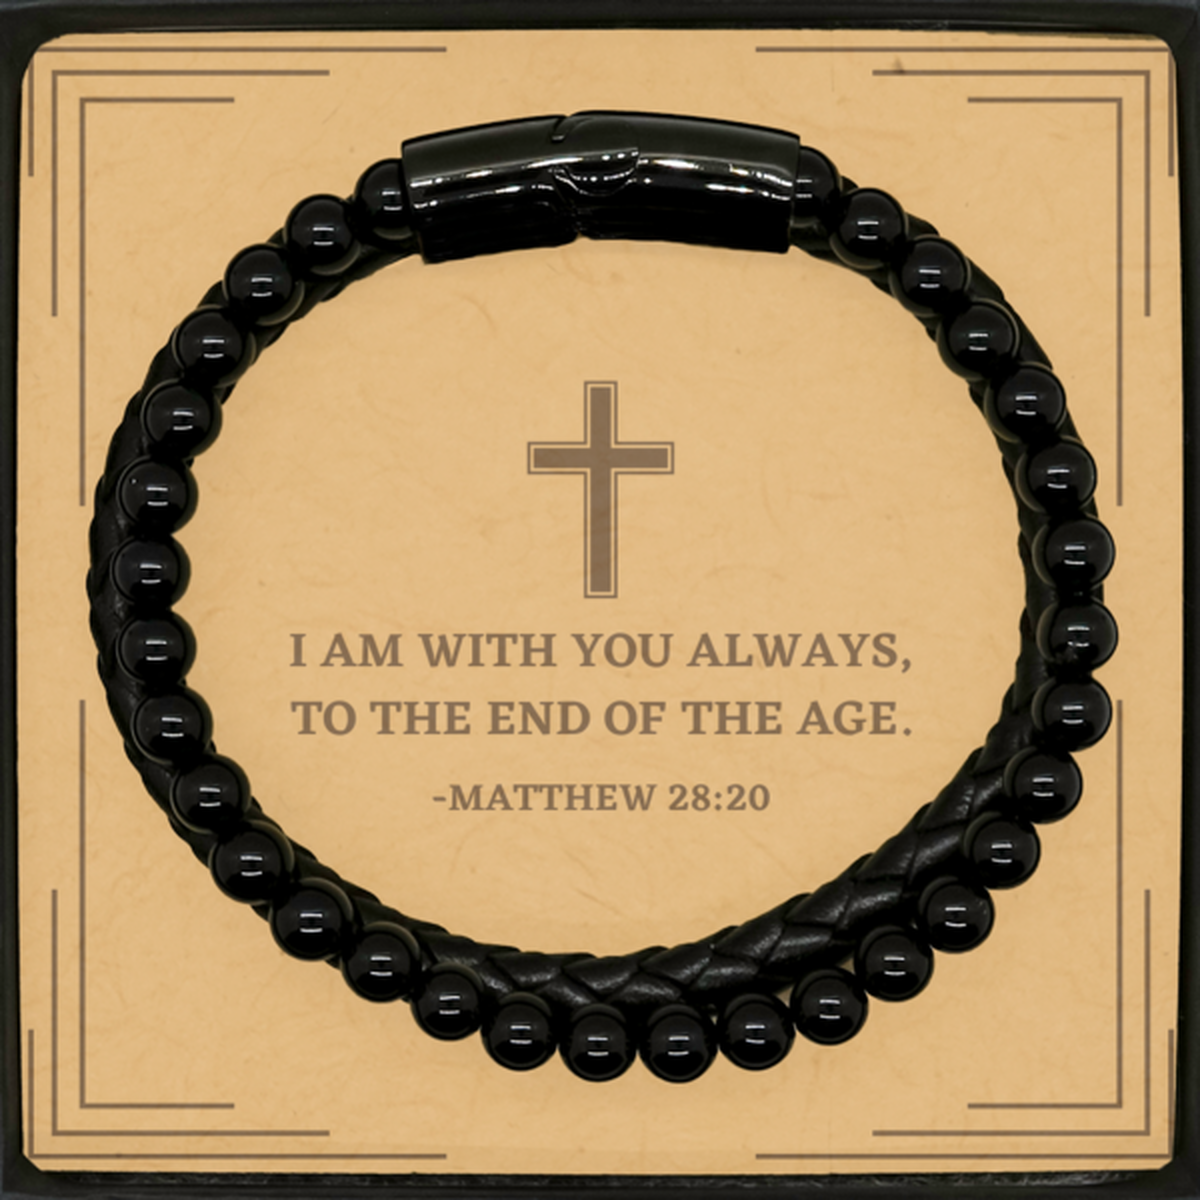 Baptism Gifts For Teenage Boys Girls, Christian Bible Verse Stone Leather Bracelet, I am with you always, Confirmation Gifts, Bible Verse Card for Son, Godson, Grandson